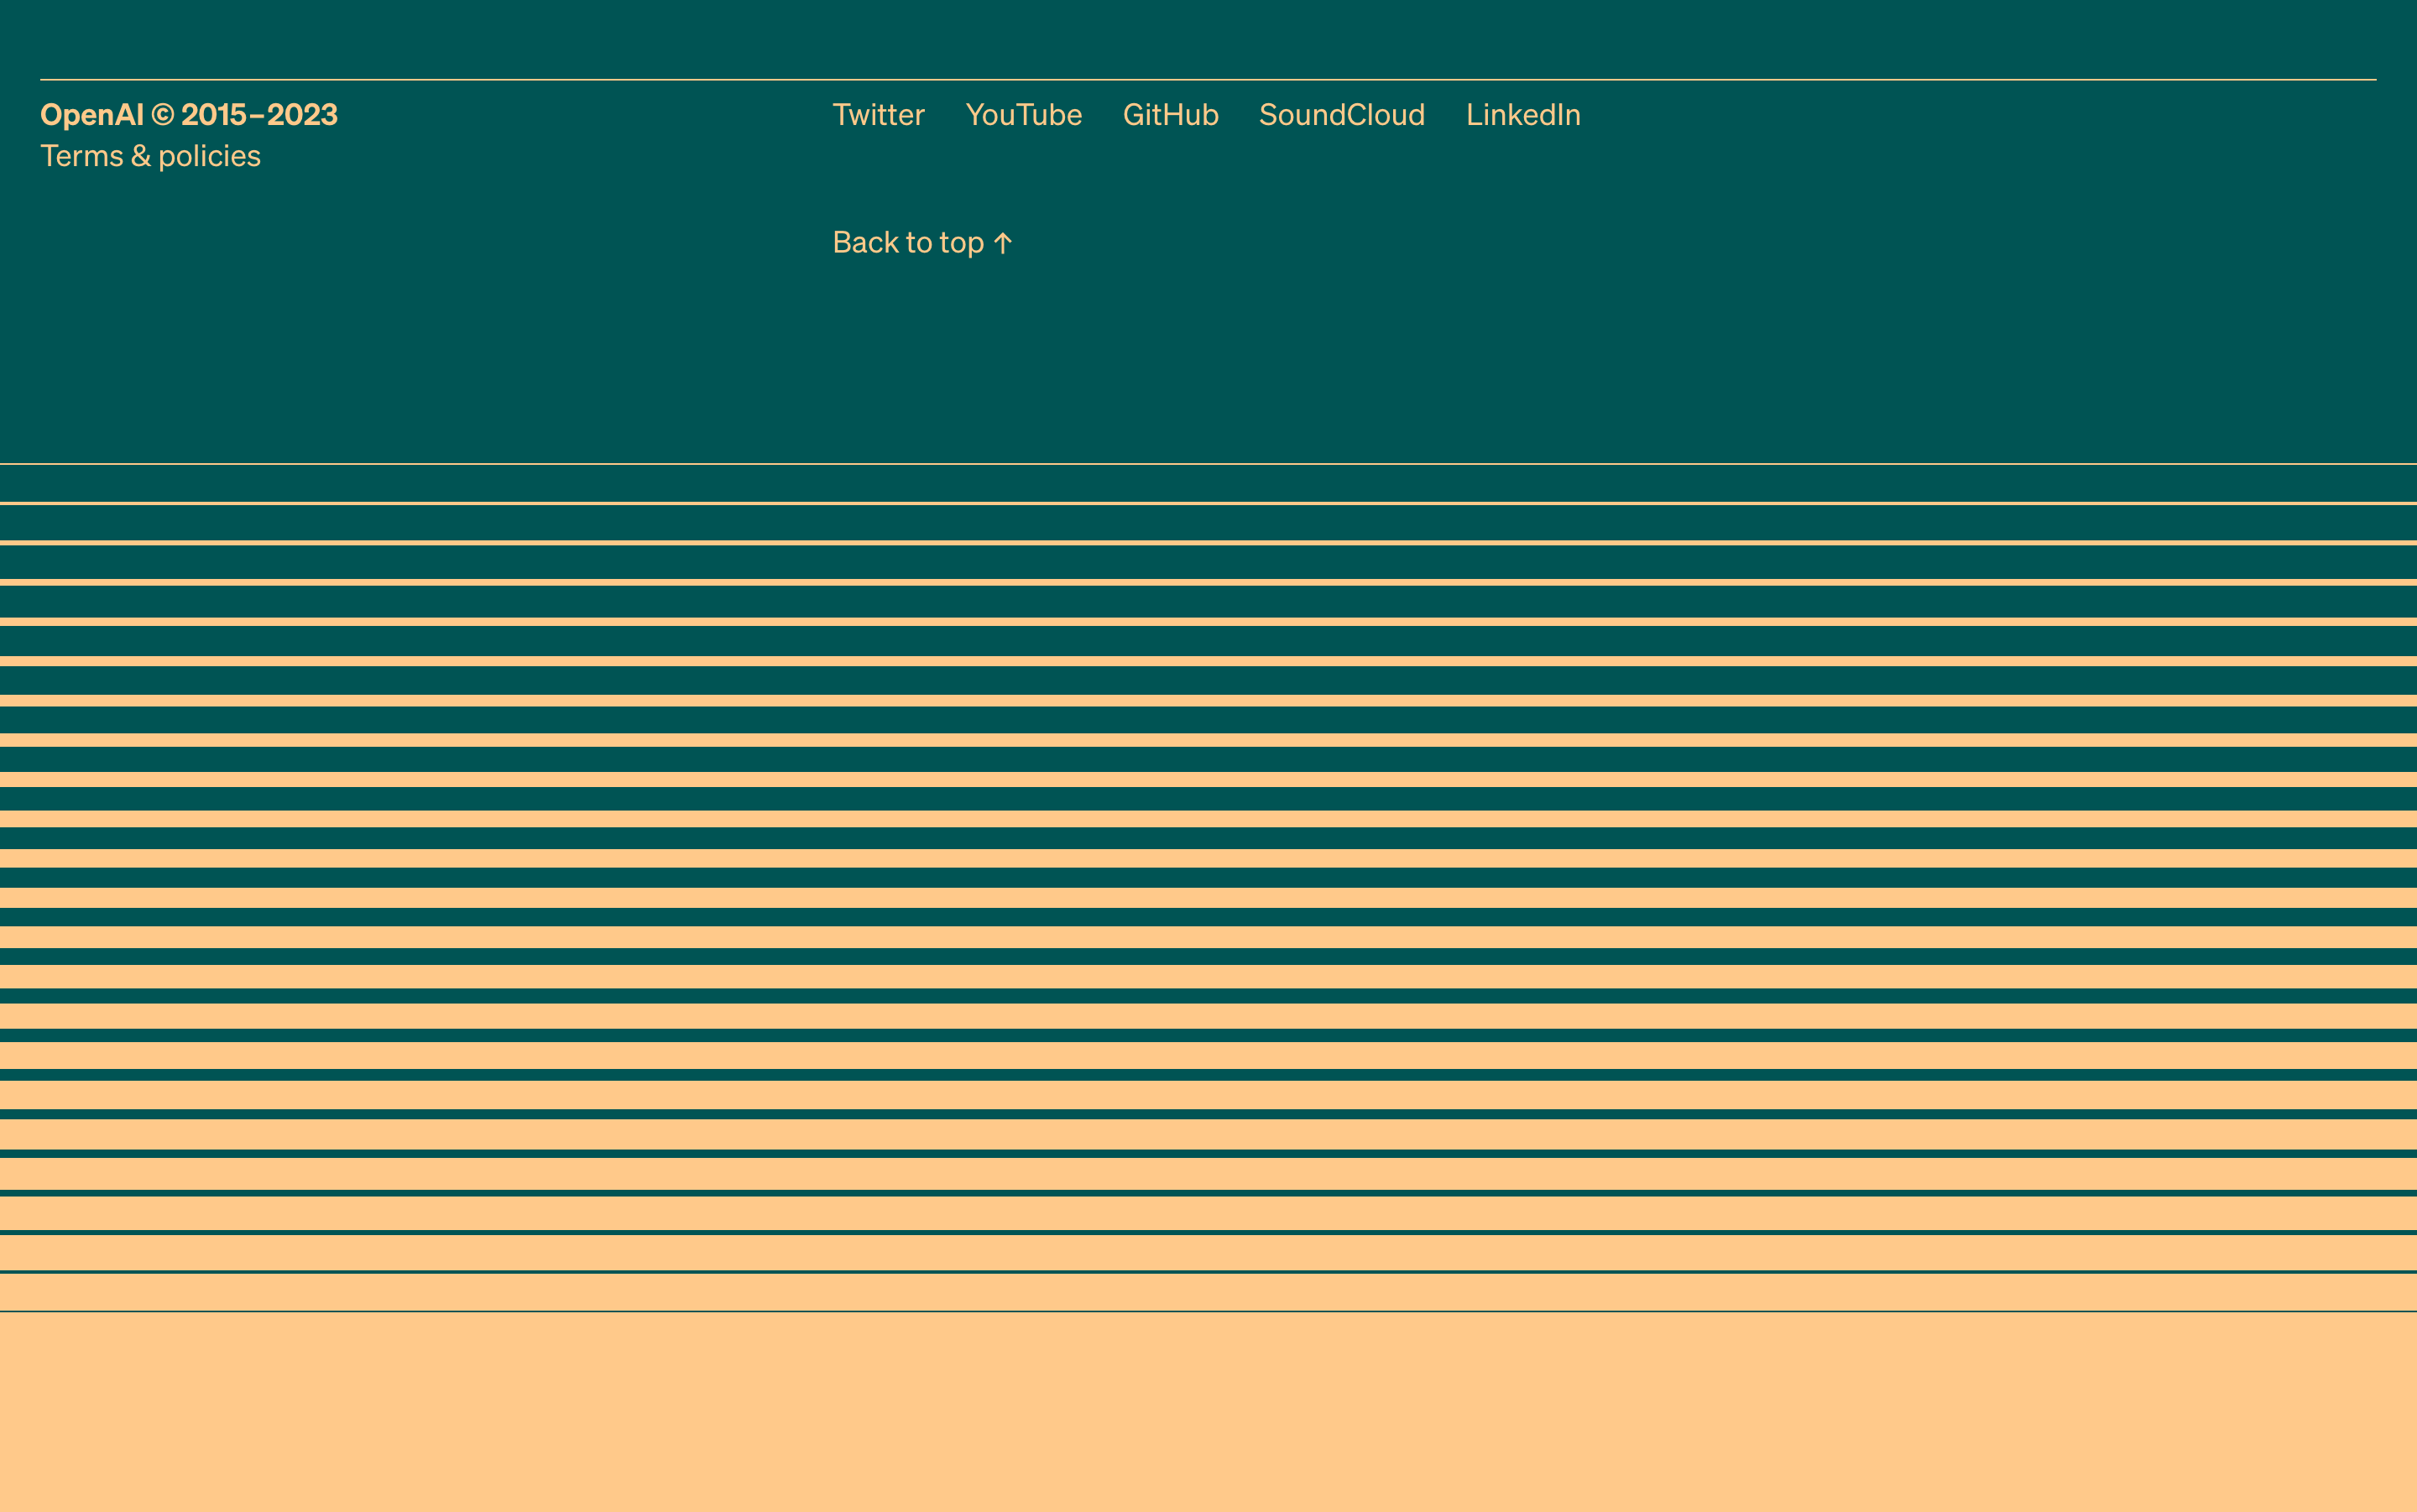 Screenshot of the OpenAI website footer. The footer starts in one color at the bottom and features horizontal lines that get taller and taller with more and more spacing until the background color ultimately changes — giving a cool fade effect. The two colors used on this page are light orange and dark cyan. Above the fade pattern are a copyright notice, links to terms, a link to go back to the top, and links to social profiles.